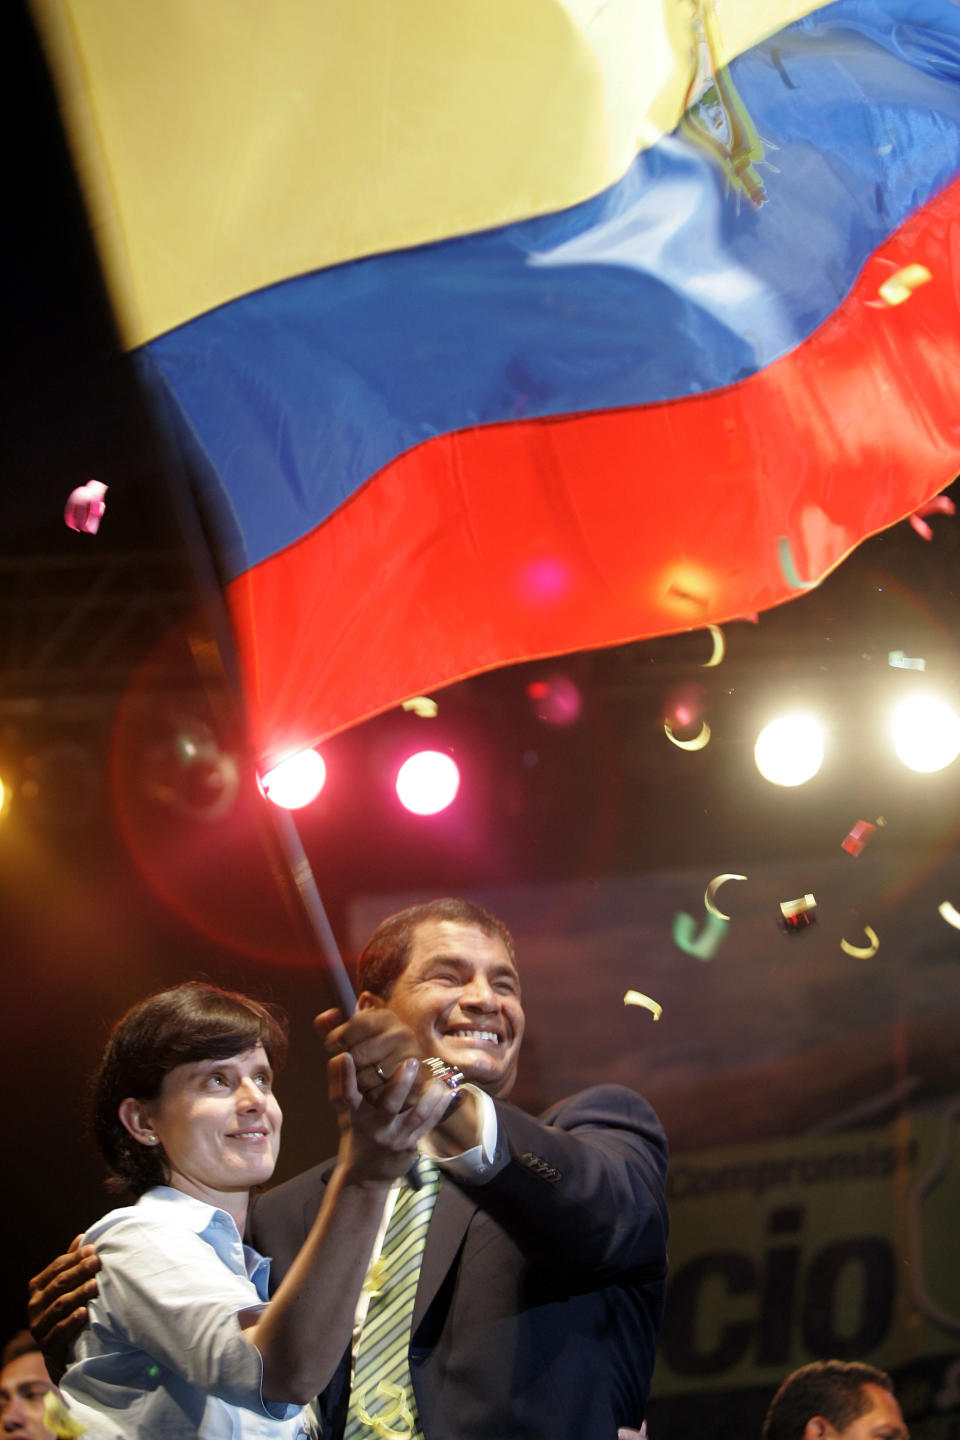 FILE - In this Nov. 26, 2006 file photo, newly-elected President Rafael Correa and his wife Anne Malherbe hold a national flag during a victory celebration, in Quito, Ecuador. Love him or hate him, most Ecuadoreans credit Correa with delivering stability after a tumultuous period that saw a musical chairs of eight presidents in a decade and an economic and banking collapse that forced Ecuador to abandon its own currency and adopt the U.S. dollar. But he did so with an iron hand that has silenced or punished critics among the press, opposition and judiciary. (AP Photo/Martin Mejia, File)